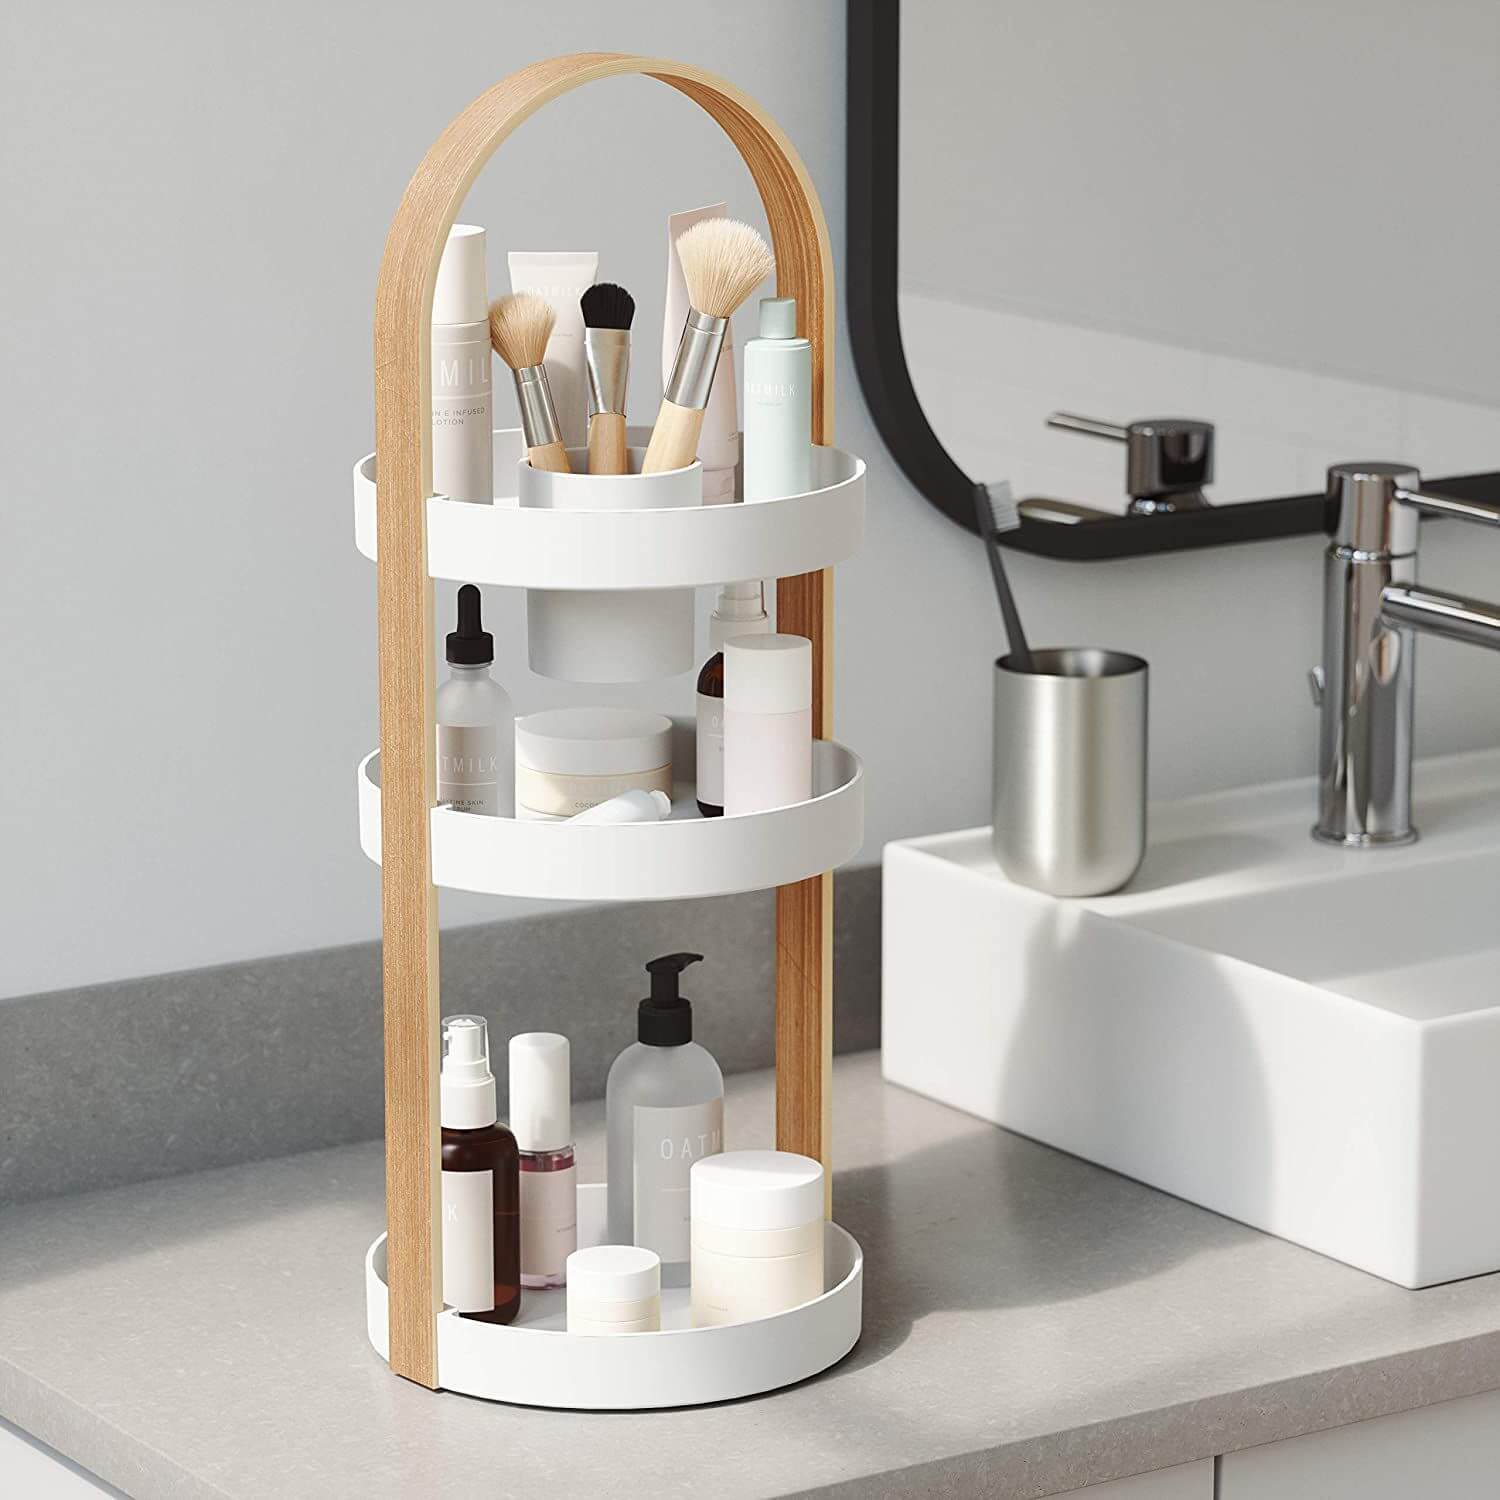 Umbra Bellwood Organiser used for makeup and skincare storage in the bathroom